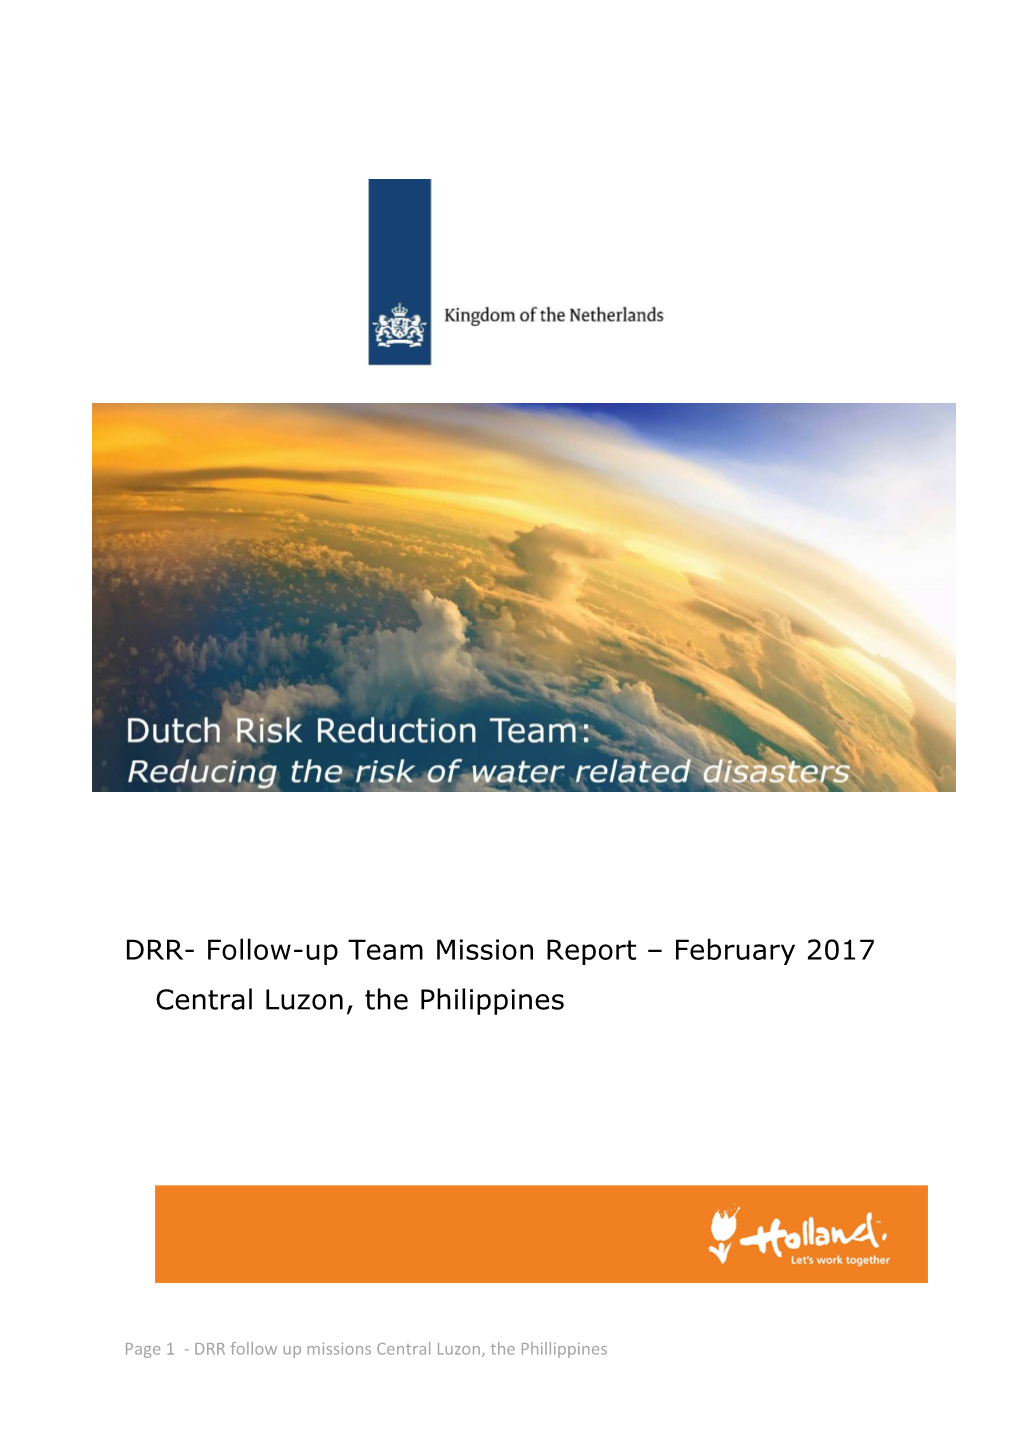 DRR Folow-Up Mission Philippines Draft 3 Final